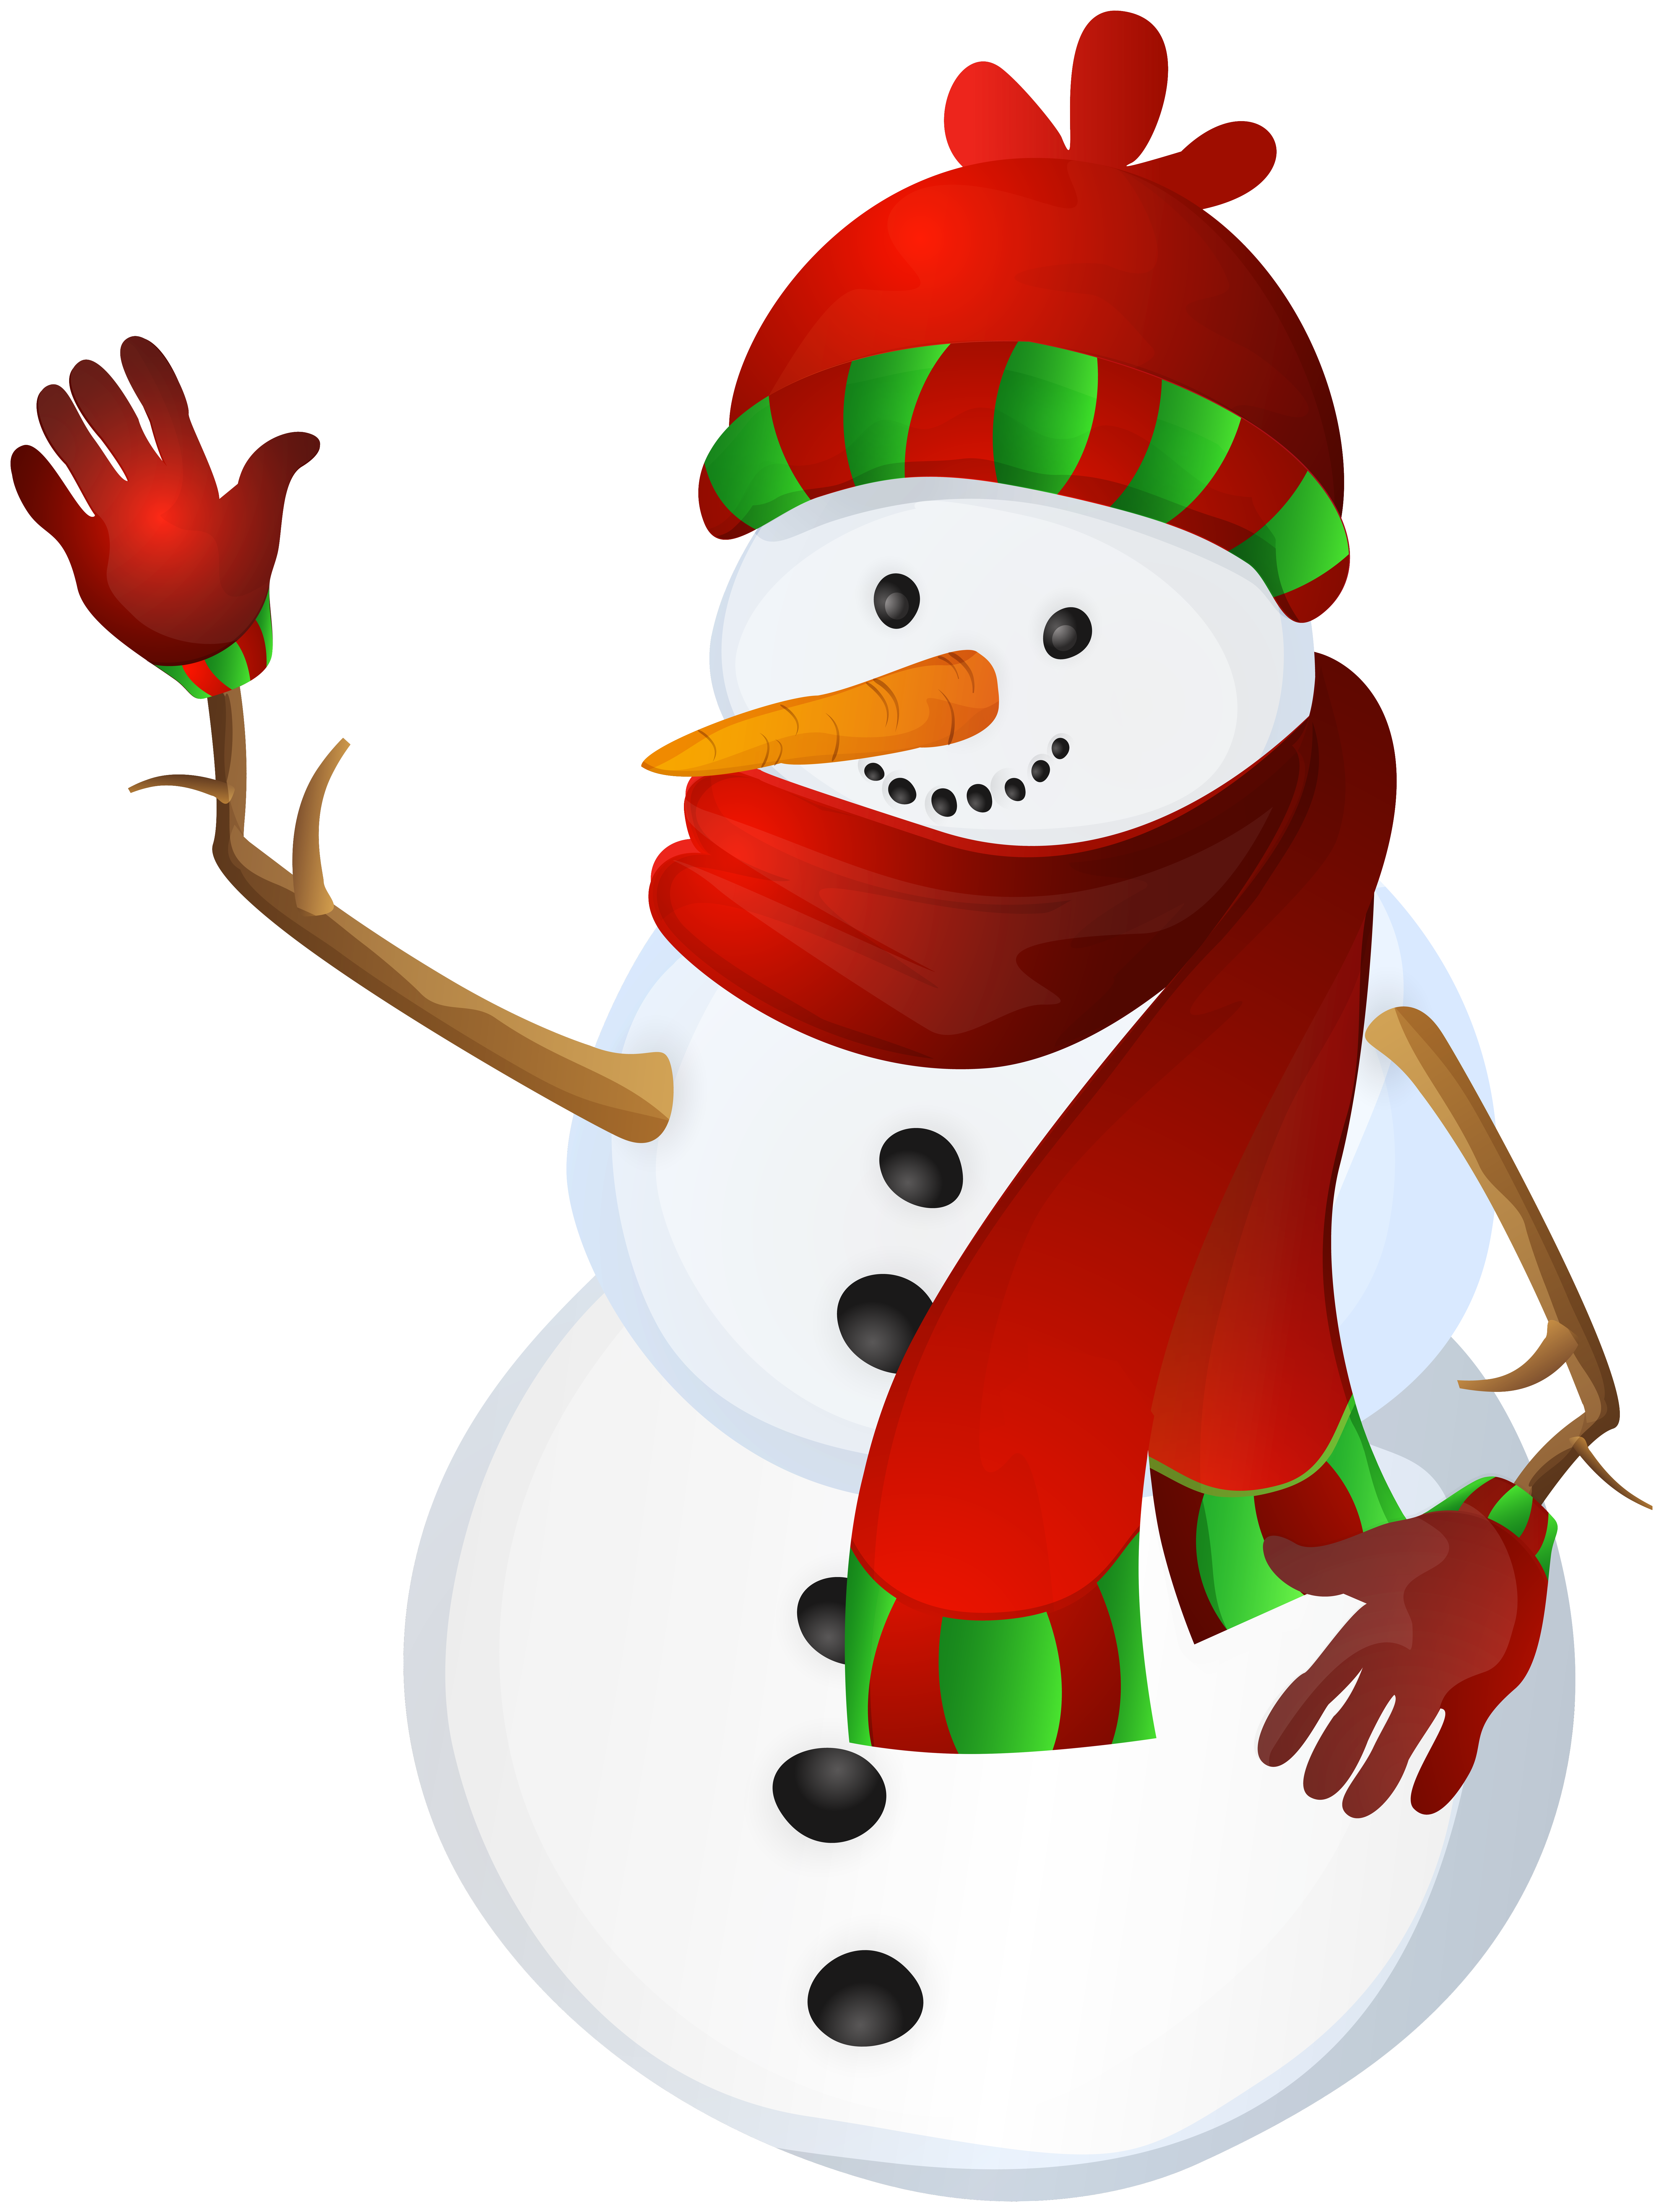 Snowman Clip Art PNG Image | Gallery Yopriceville - High ...